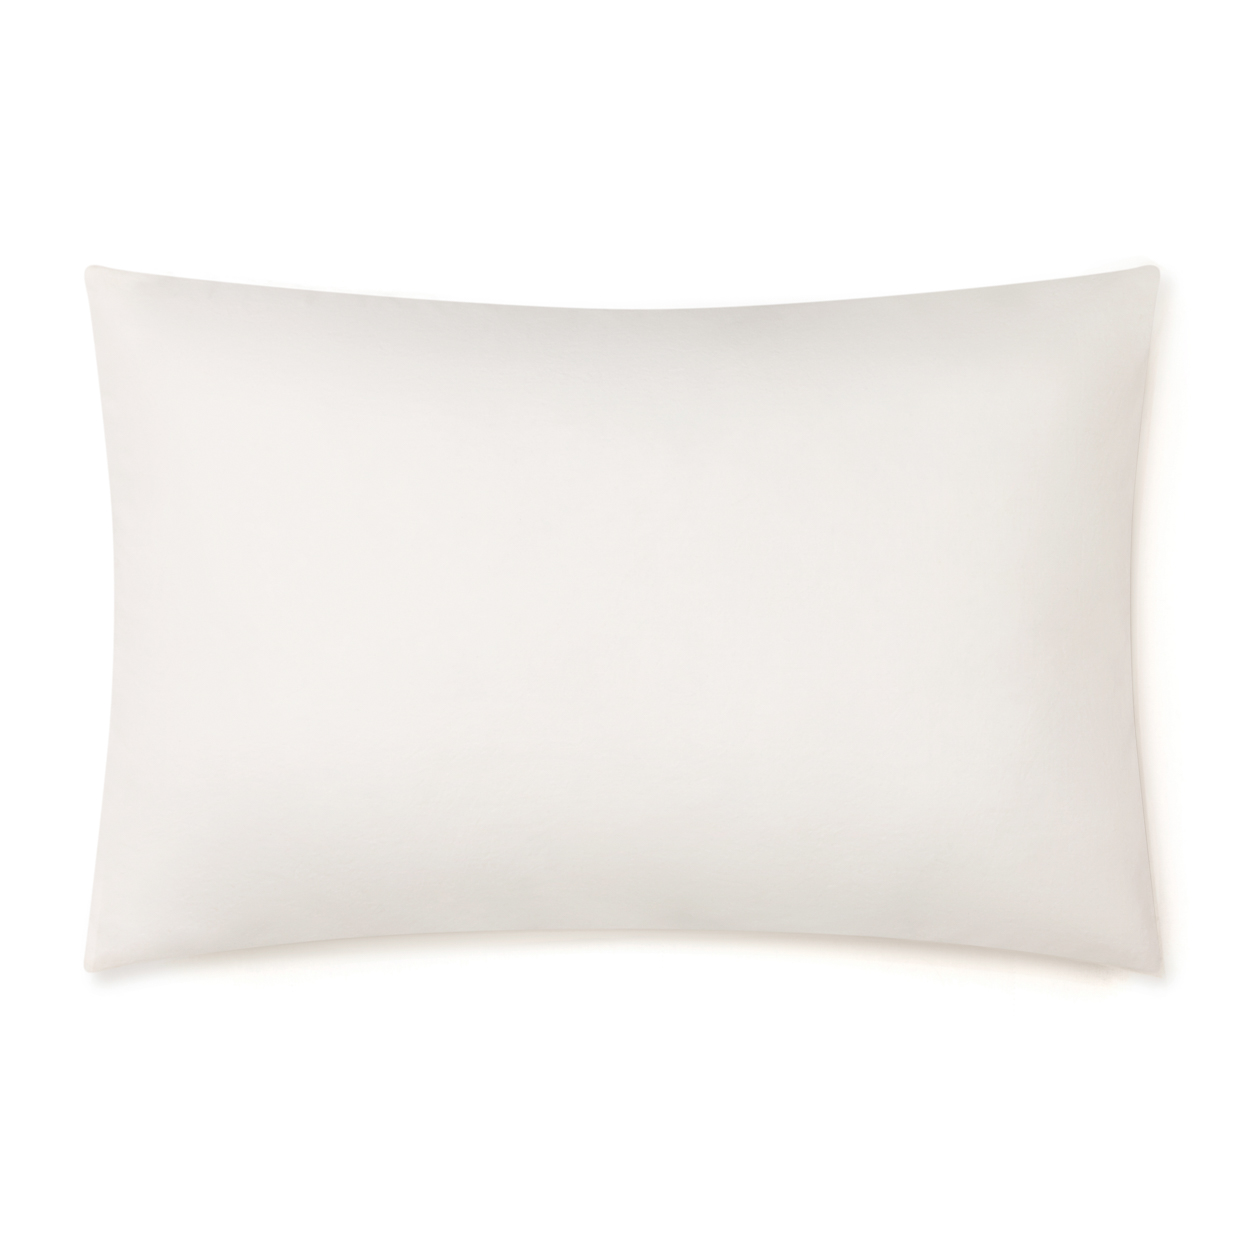 Washed Cotton Pillowcases -Set of 2